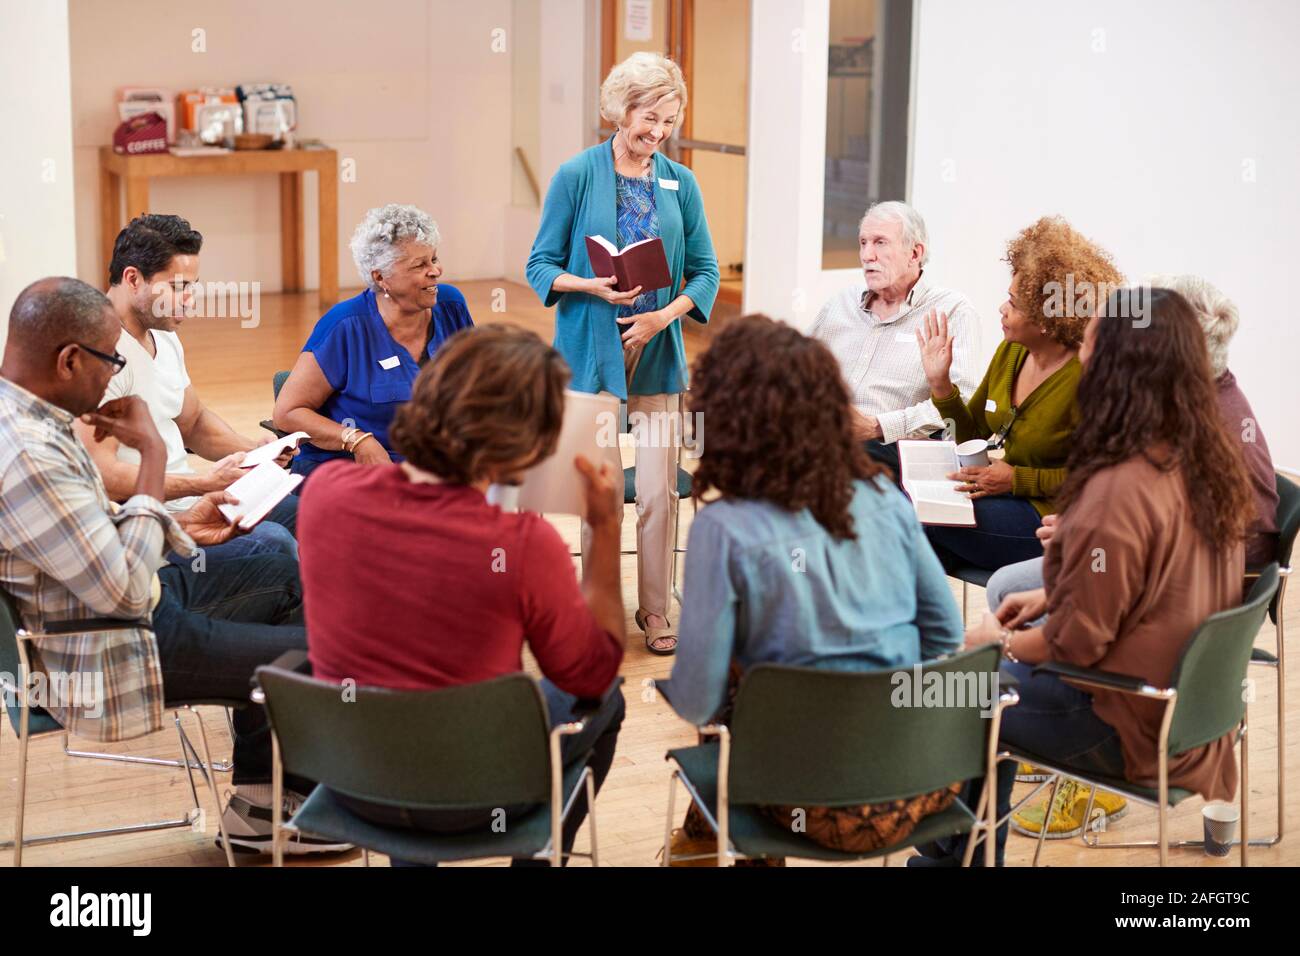 People Attending Bible Study Or Book Group Meeting In Community Center Stock Photo